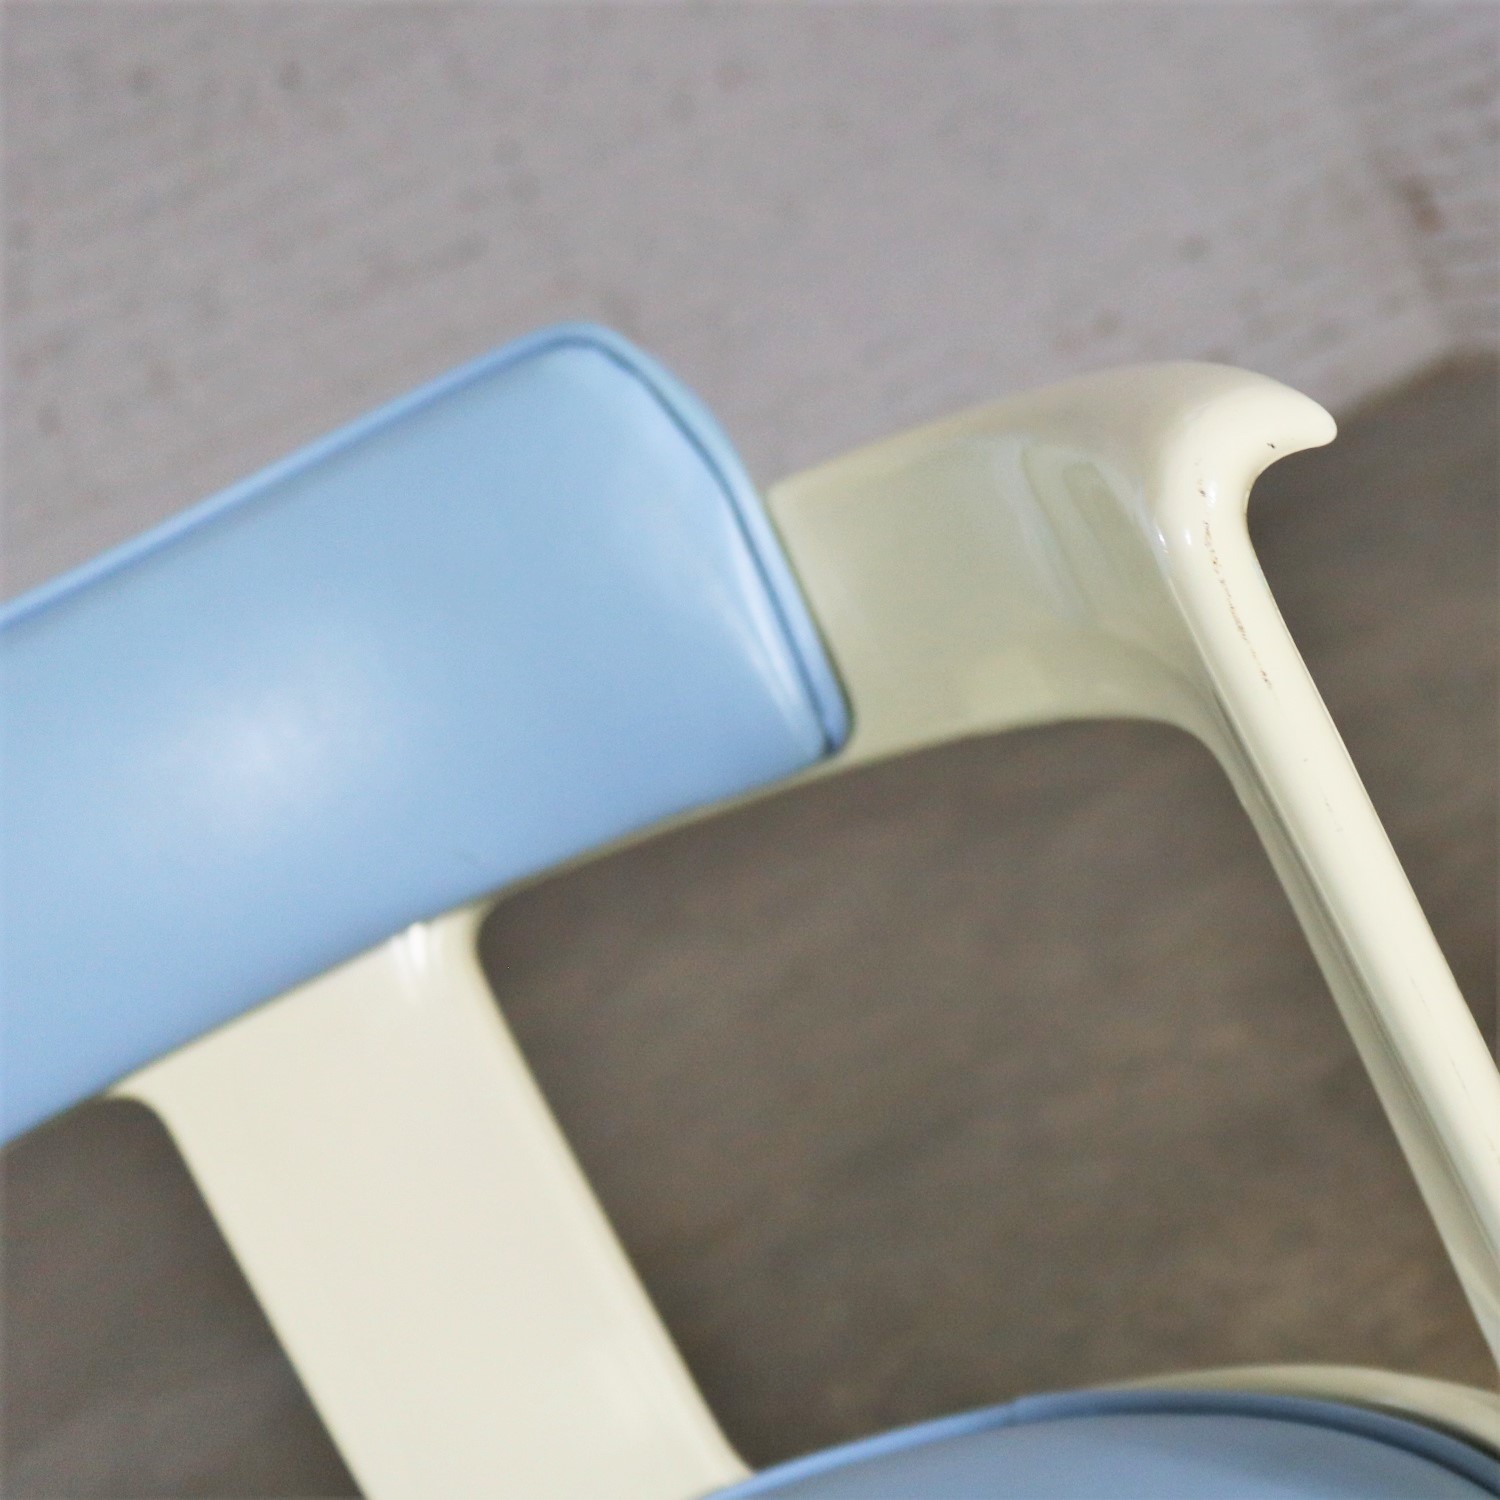 Daystrom Furniture Tulip Style Swivel Chairs in Baby Blue and White